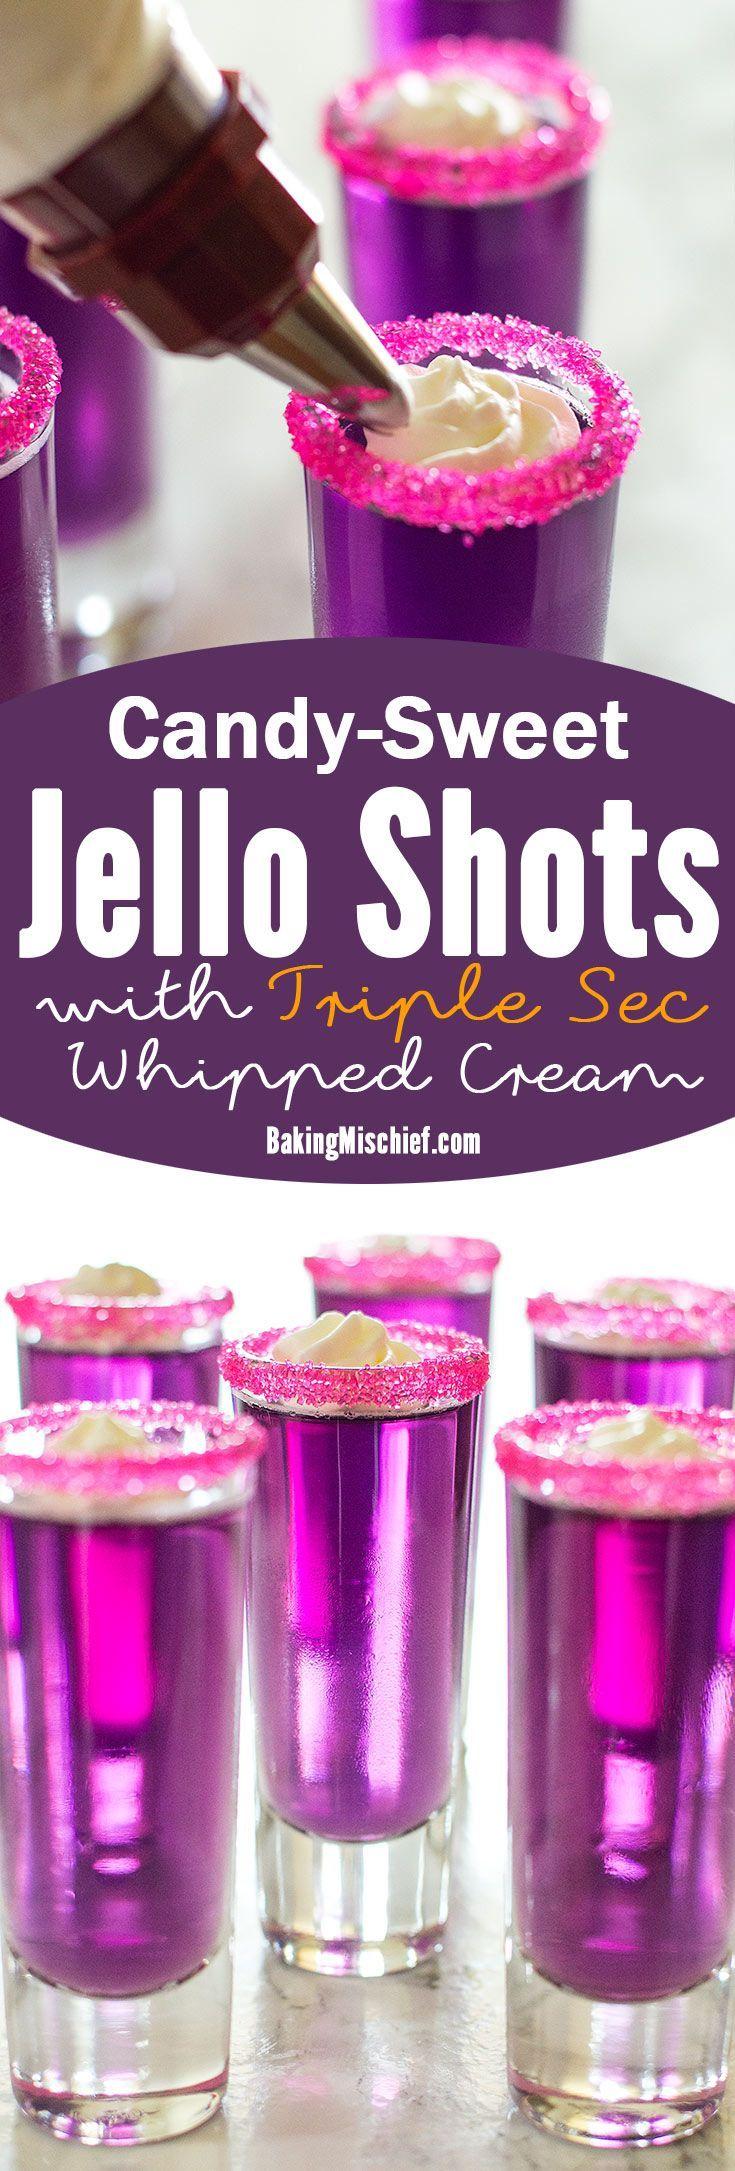 Mariage - Candy-Sweet Jello Shots With Triple Sec Whipped Cream